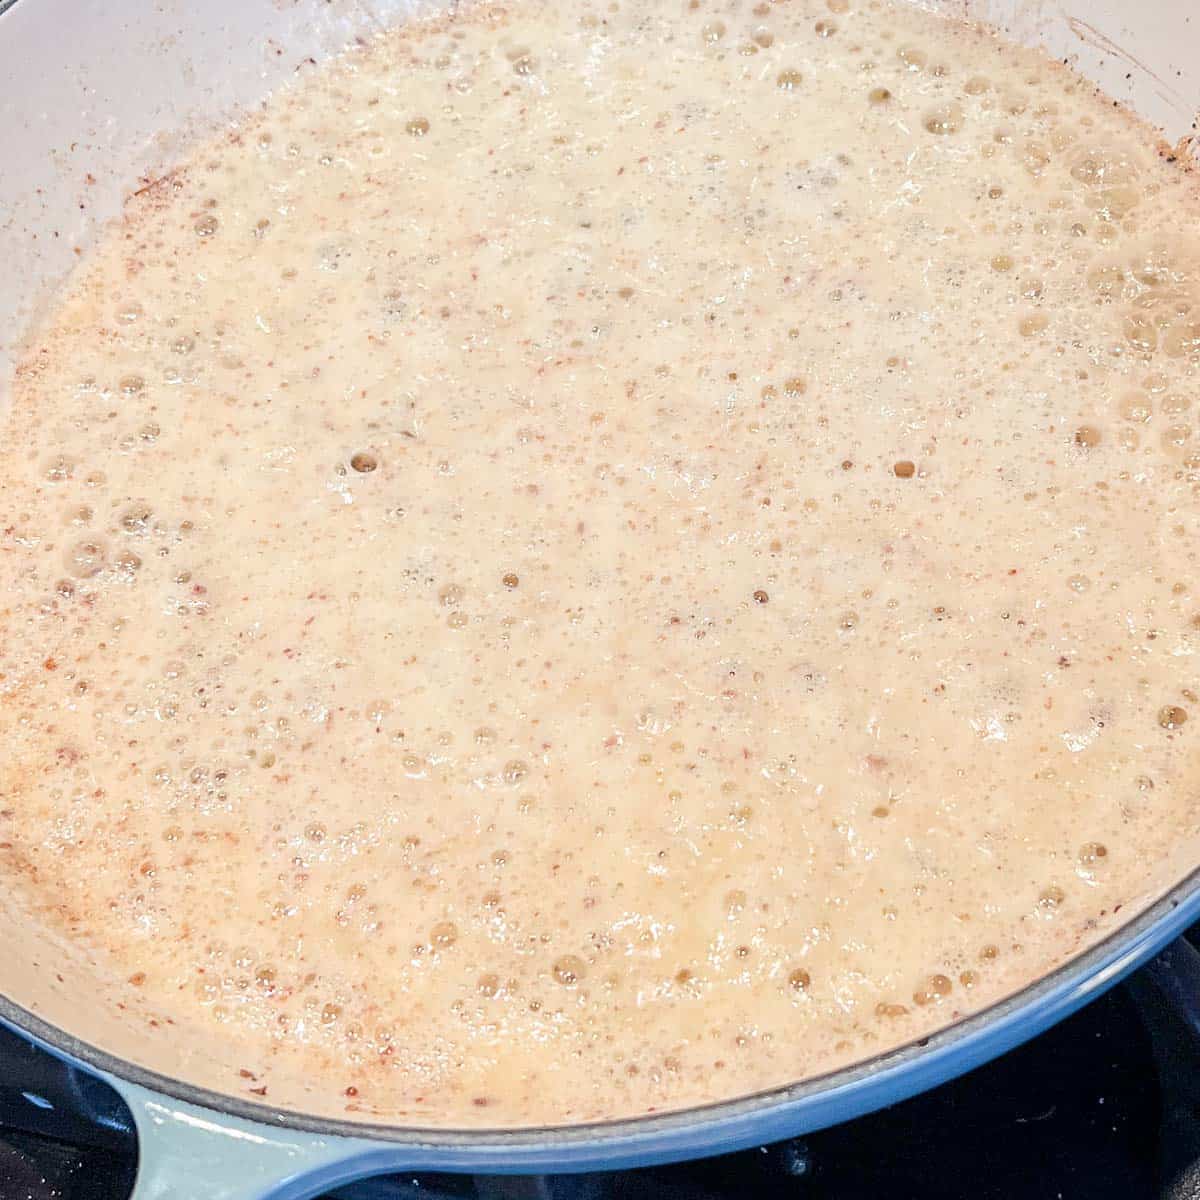 A roux bubbliing in a pan.